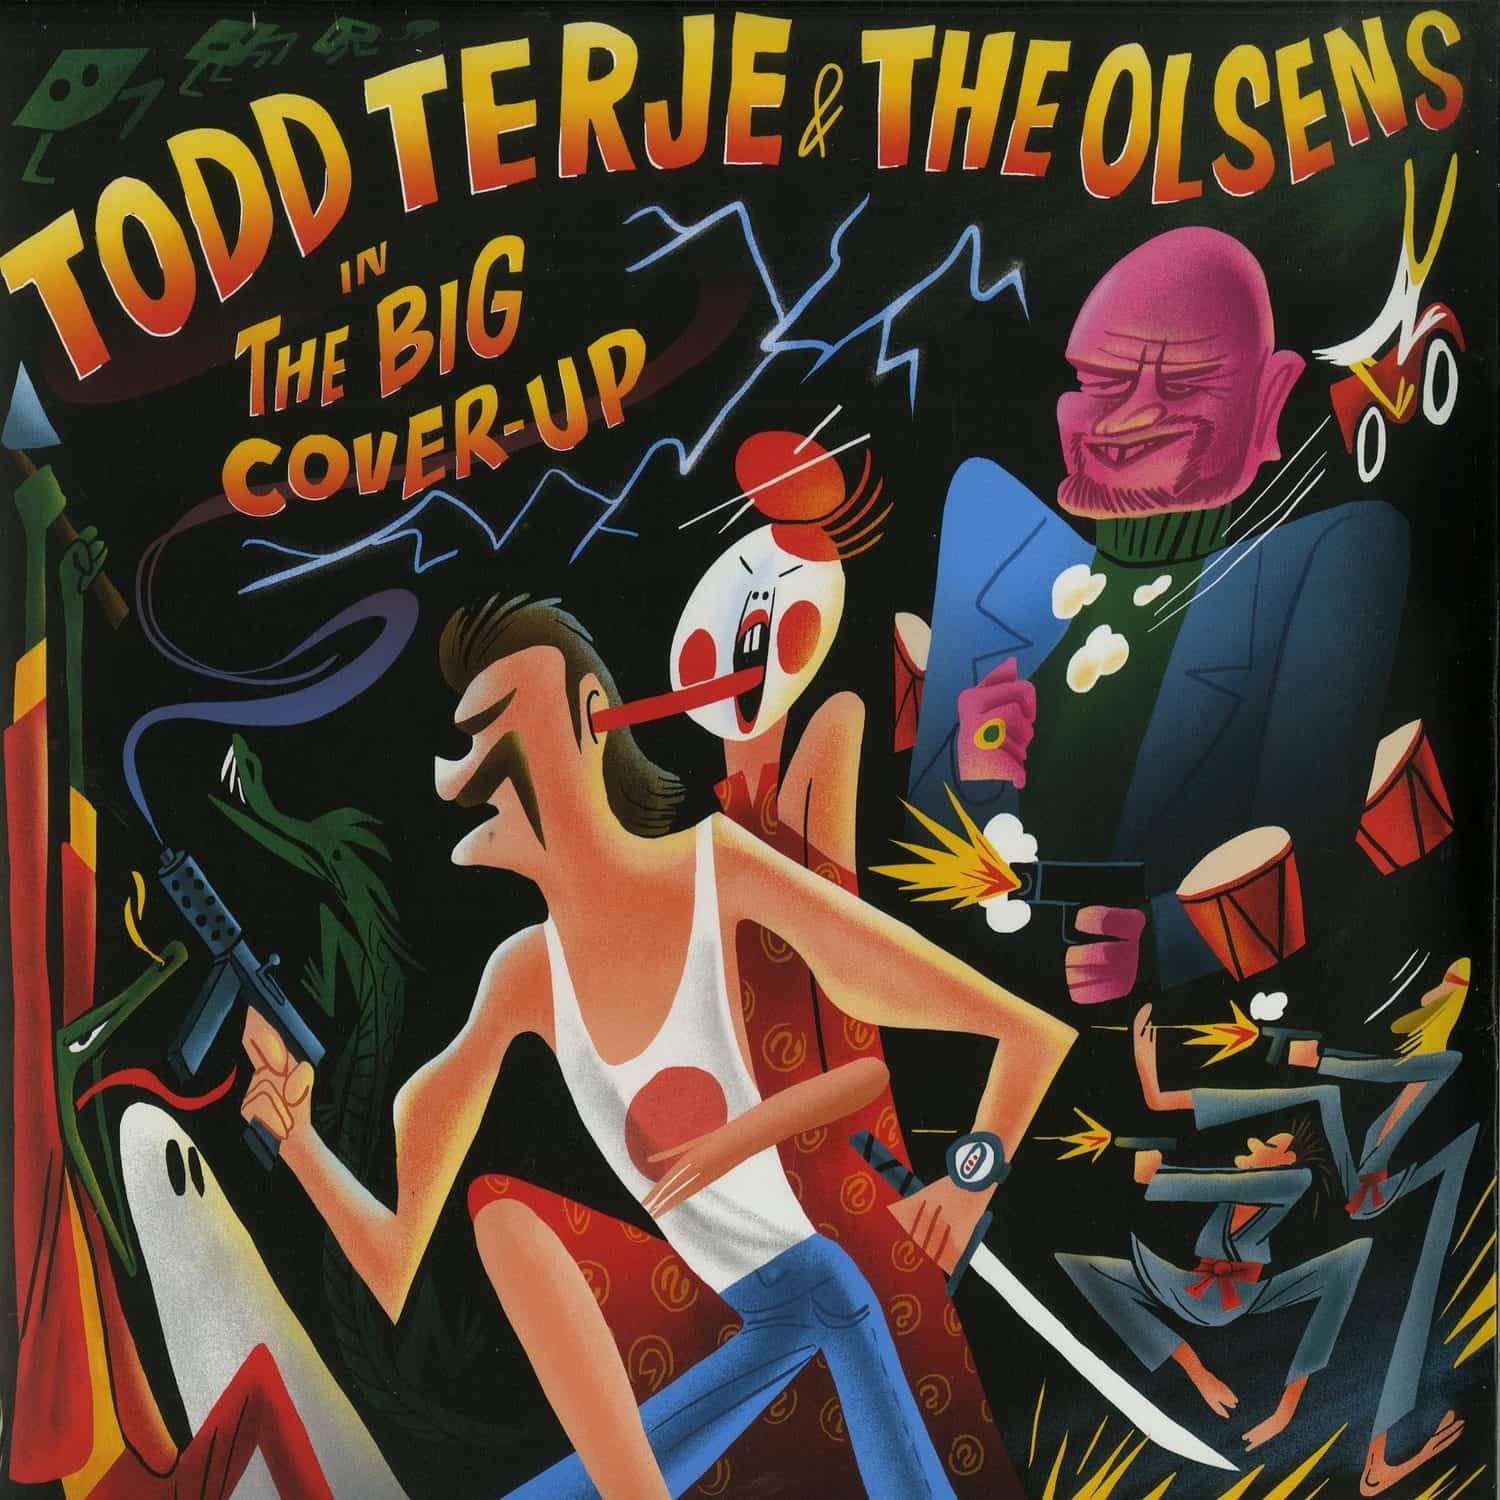 Todd Terje & The Olsens - THE BIG COVER-UP 